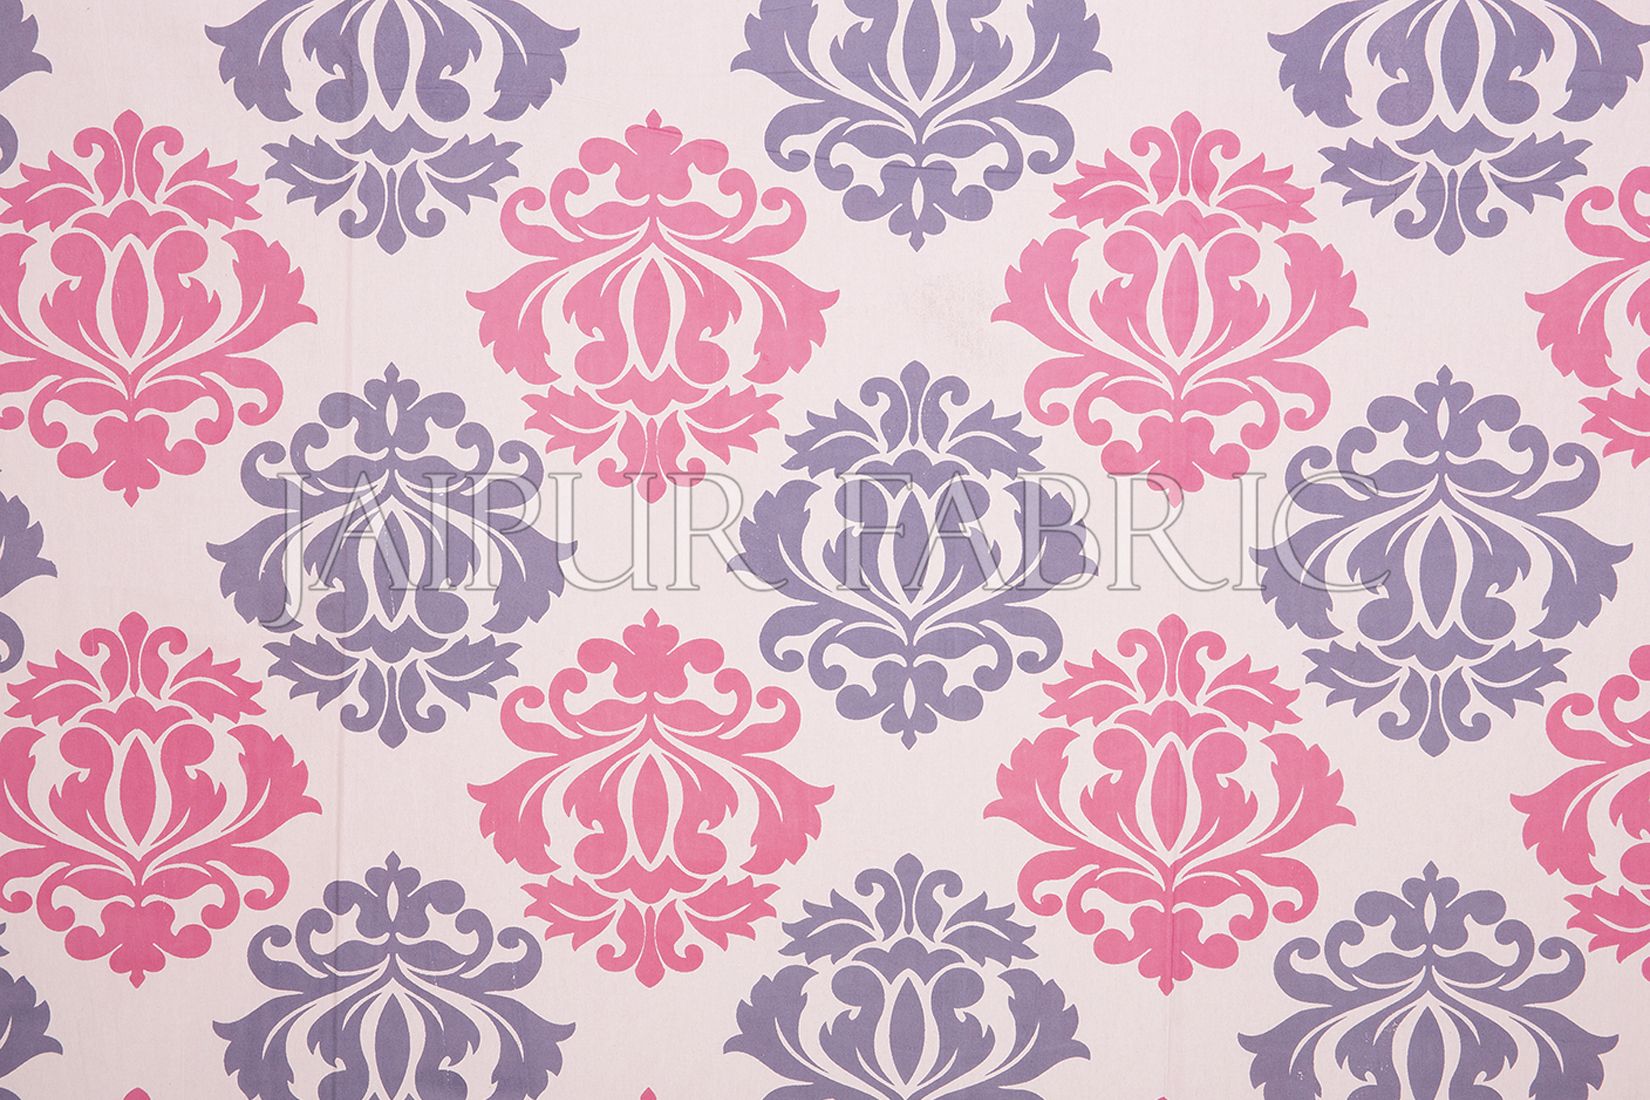 Pink Border Floral Pattern Screen Print Cotton Double Bed Sheet